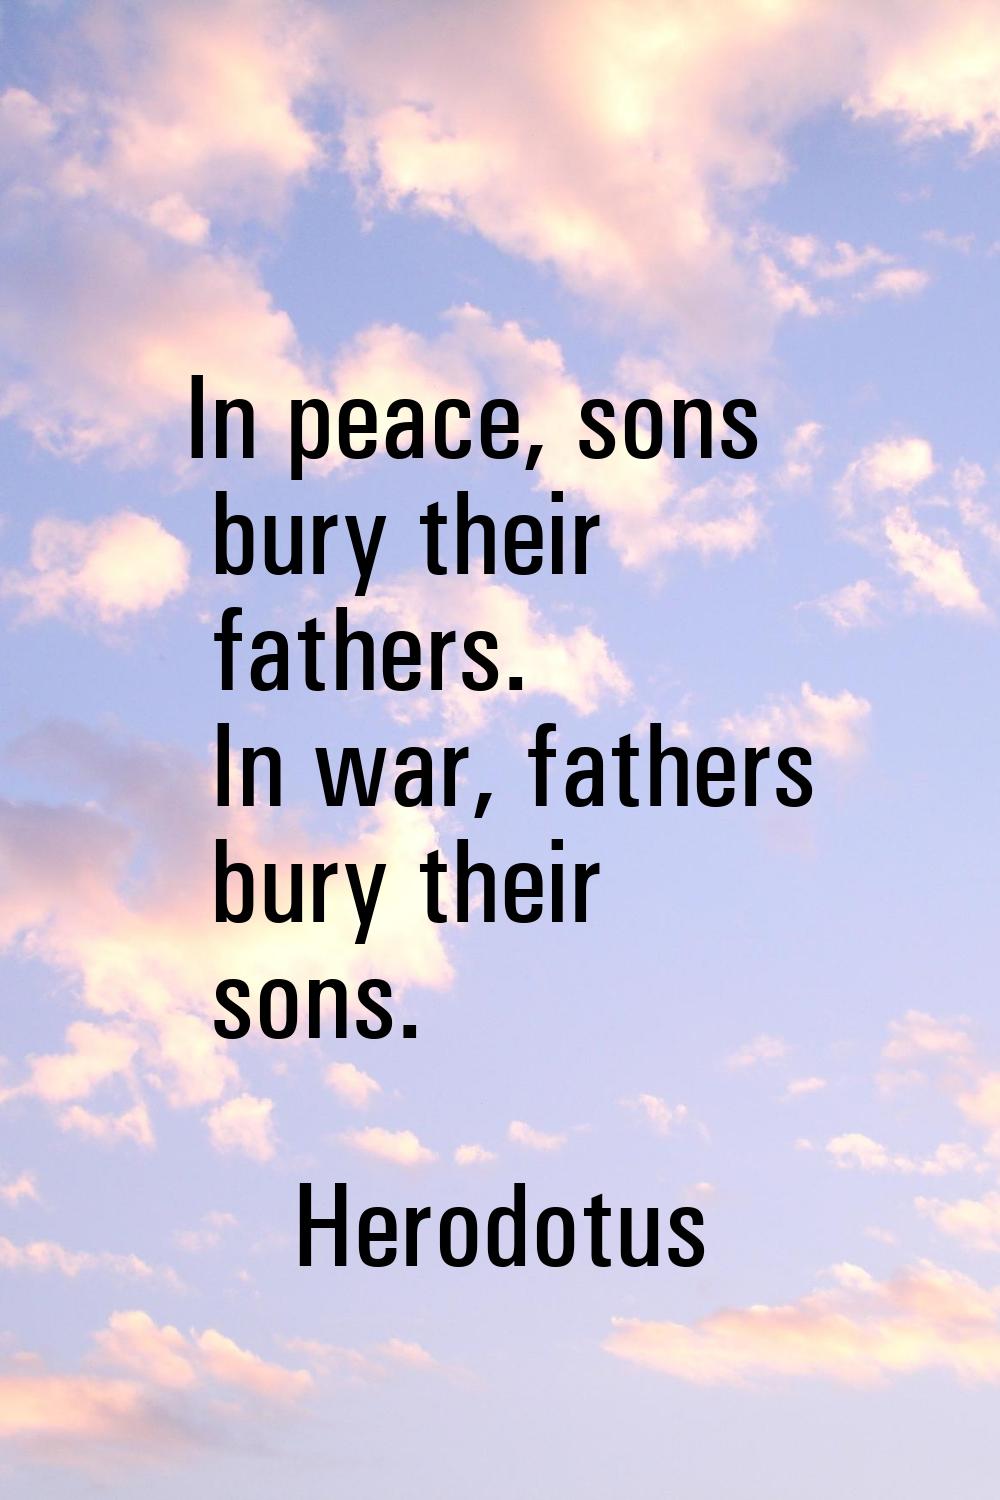 In peace, sons bury their fathers. In war, fathers bury their sons.